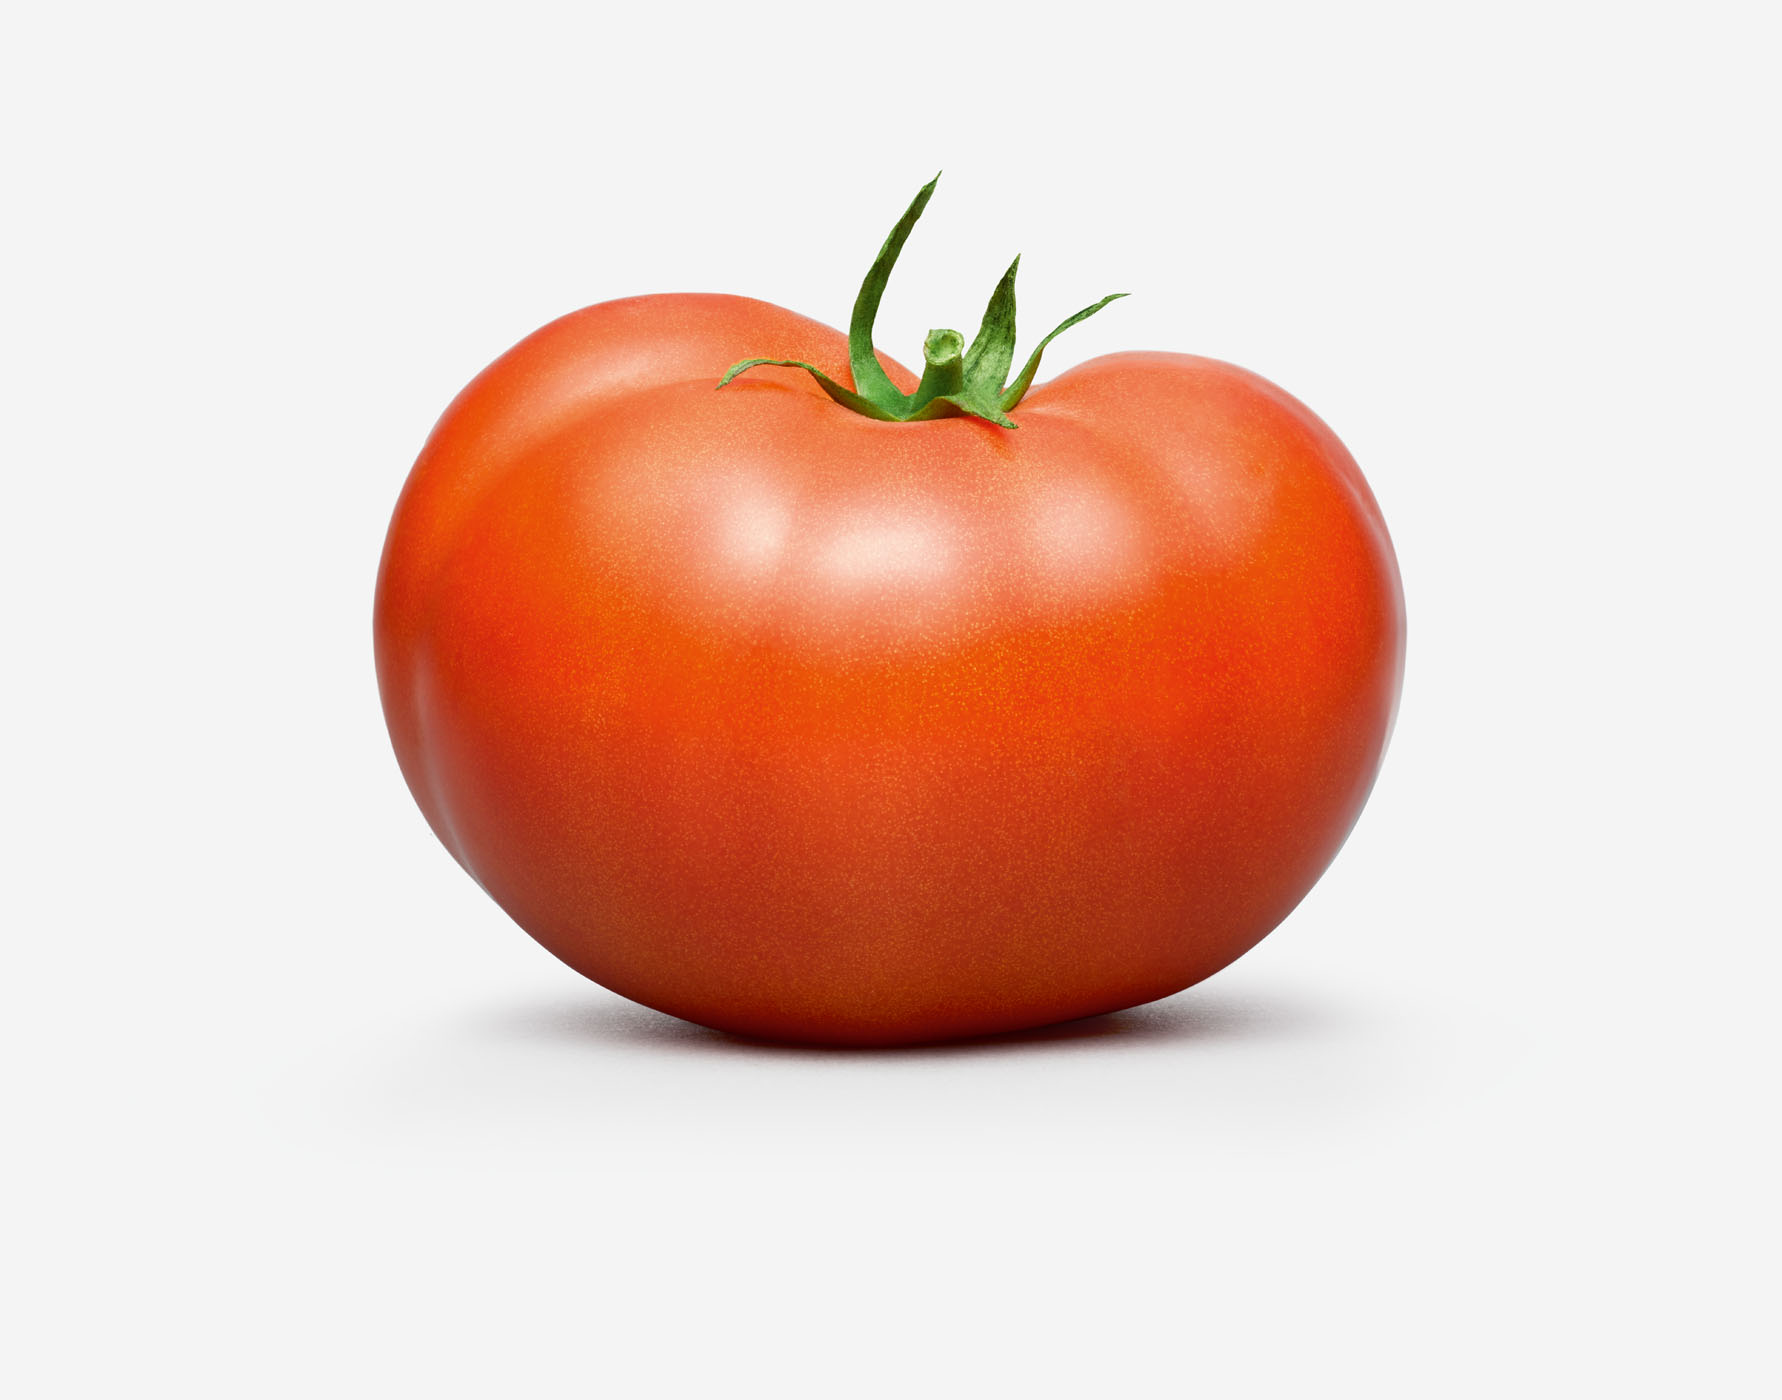 Tomato by Alexander Kent London based still life and product photographer.